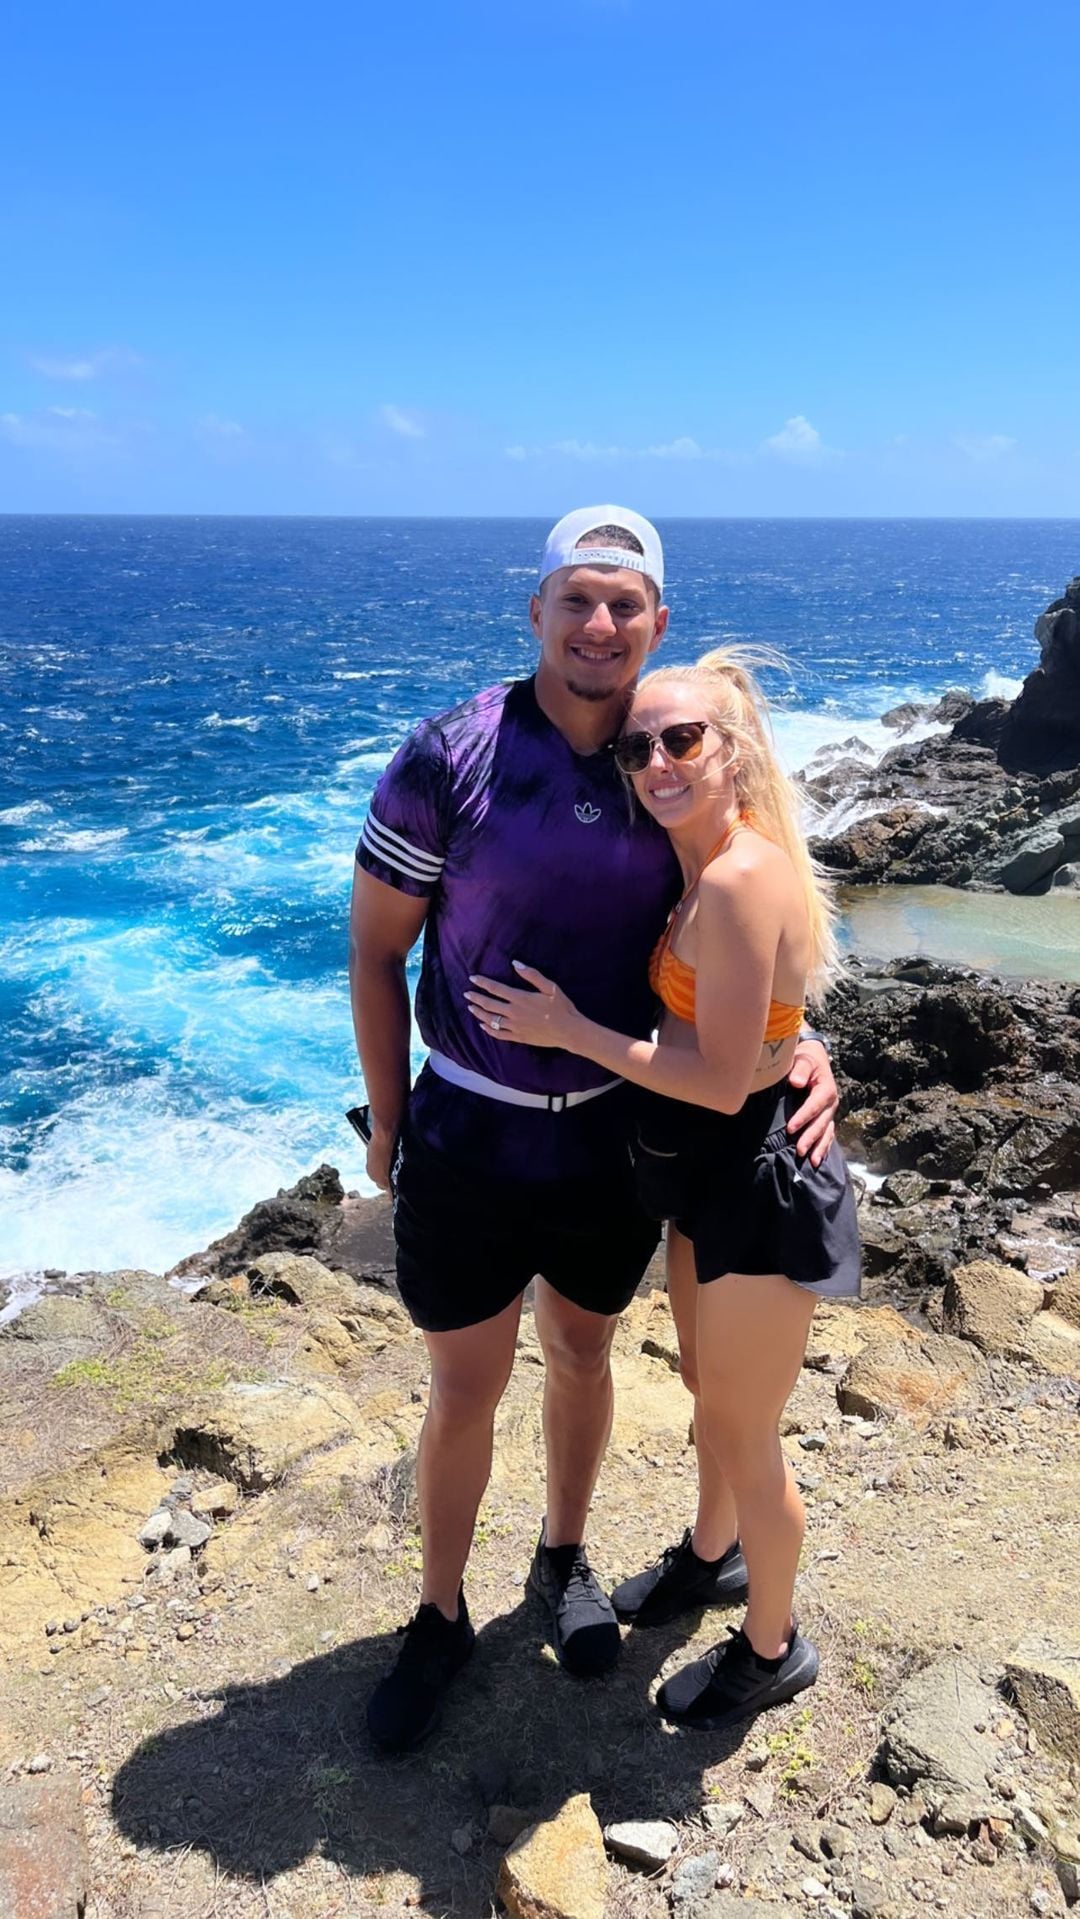 Brittany and Patrick Mahomes honeymoon in tropical St. Barts